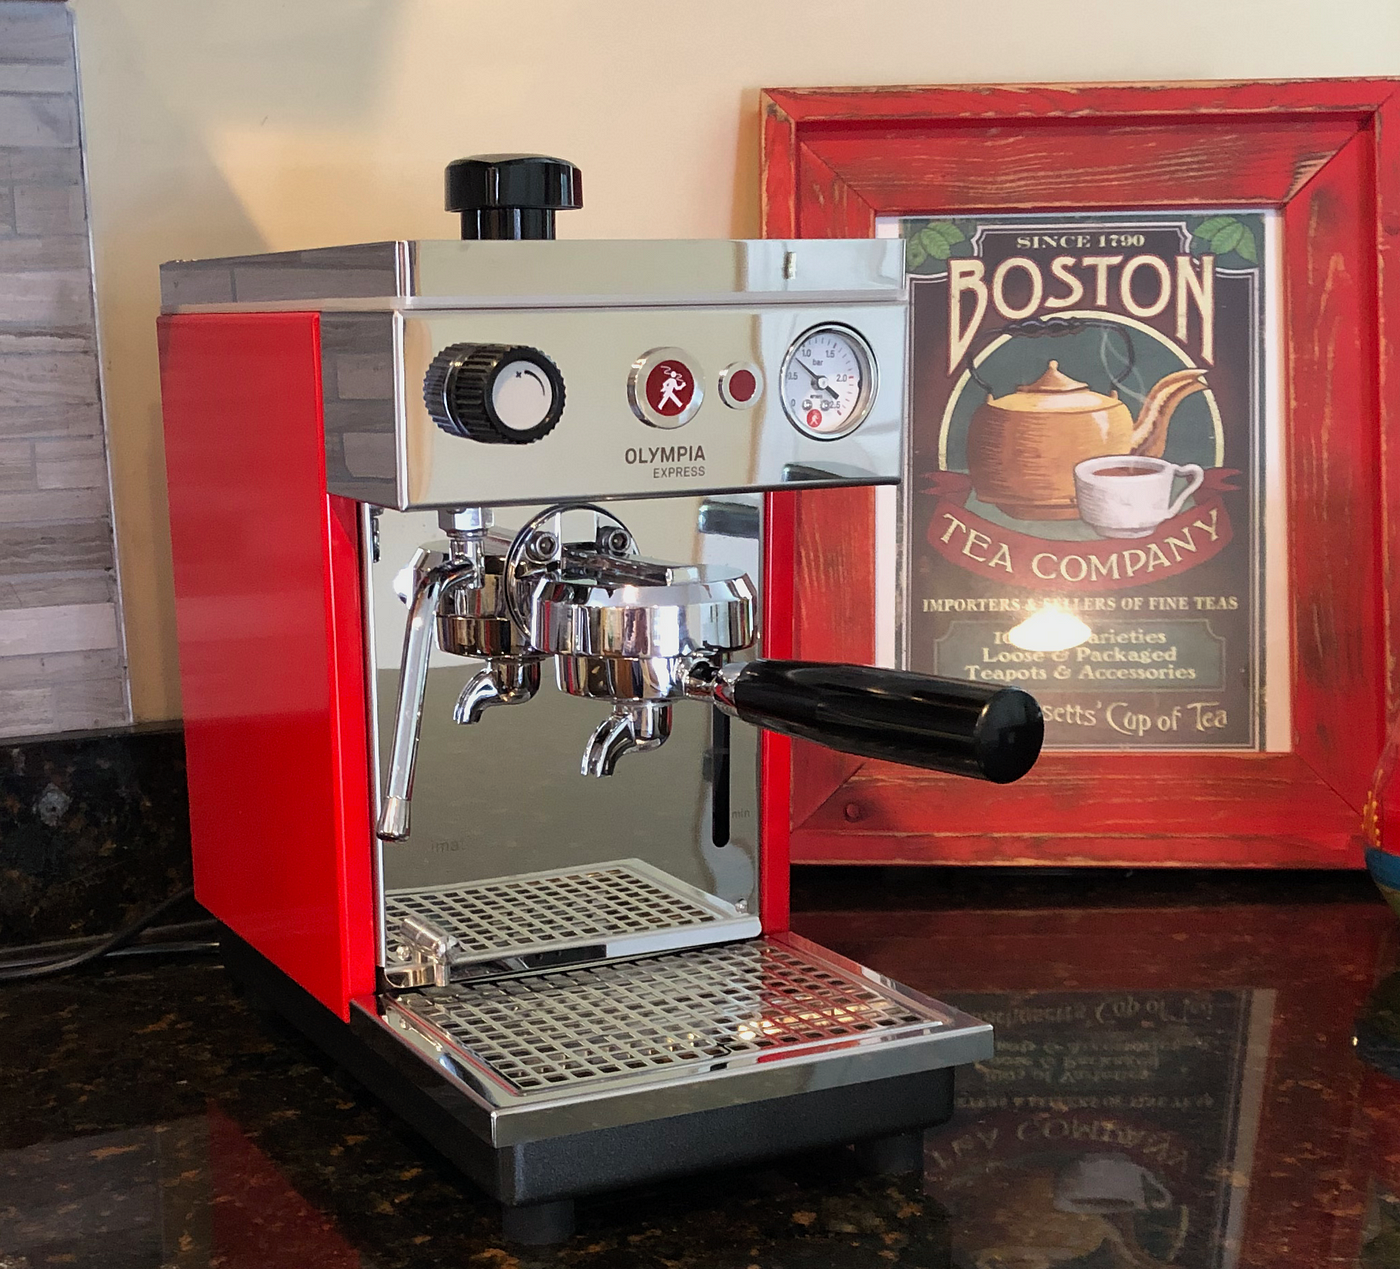 The Olympia Express Maximatic - is it an overlooked espresso masterpiece? |  by Dr.H | Medium